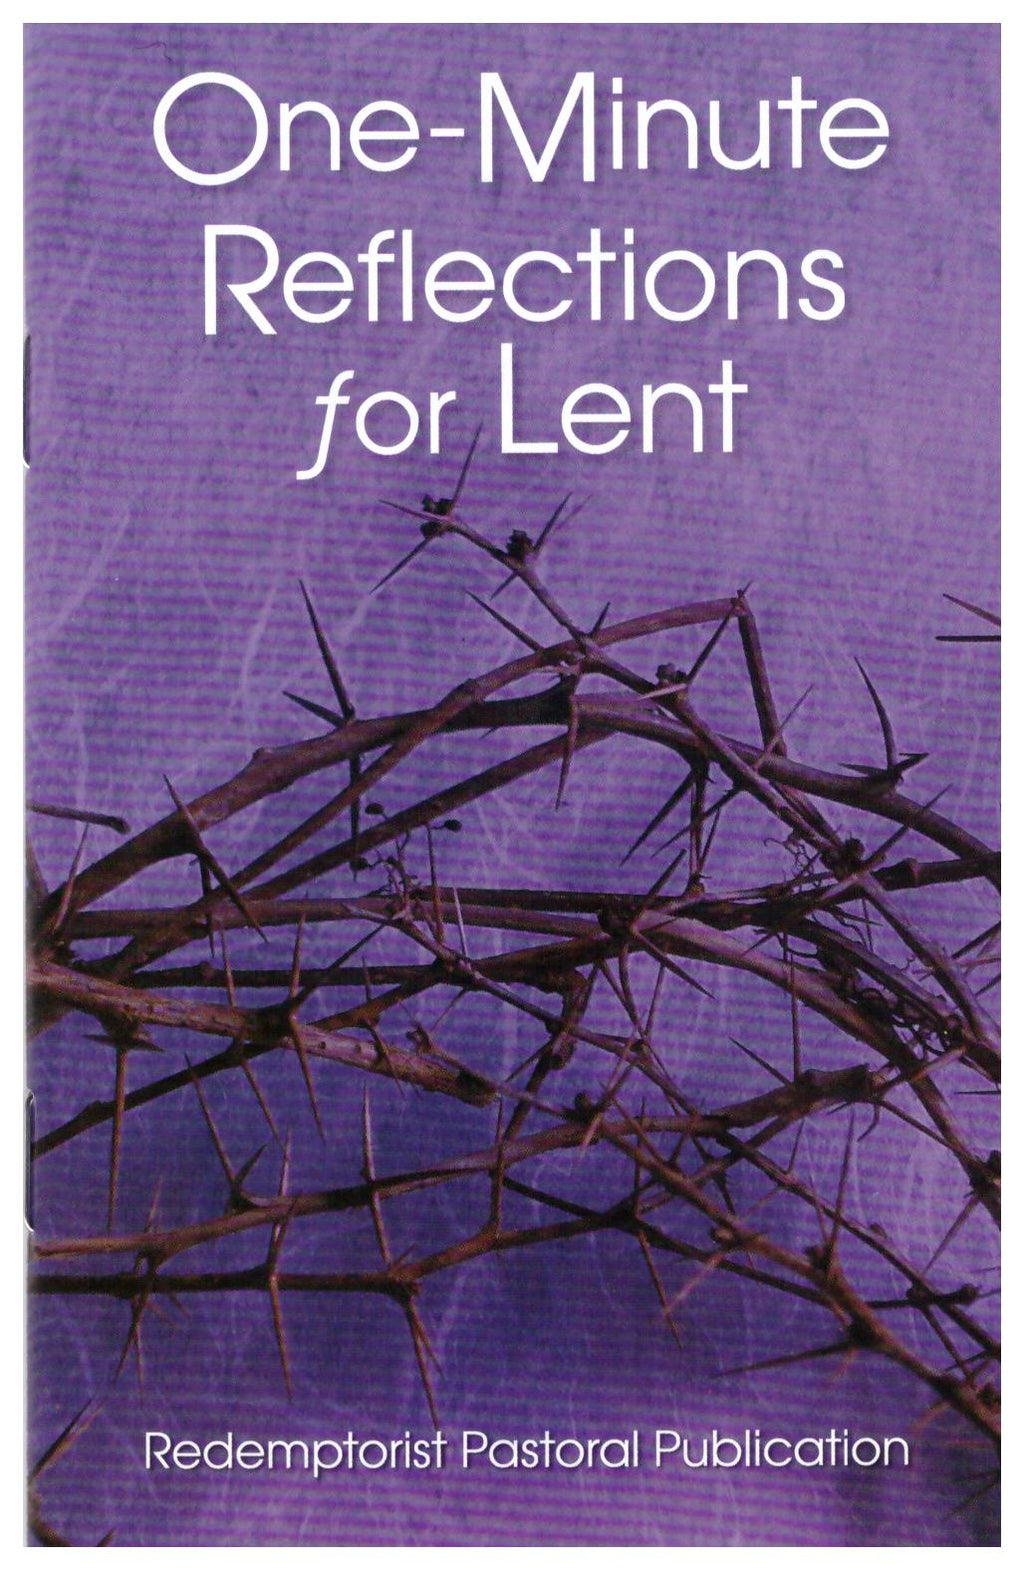 ONE-MINUTE REFLECTIONS 4 LENT